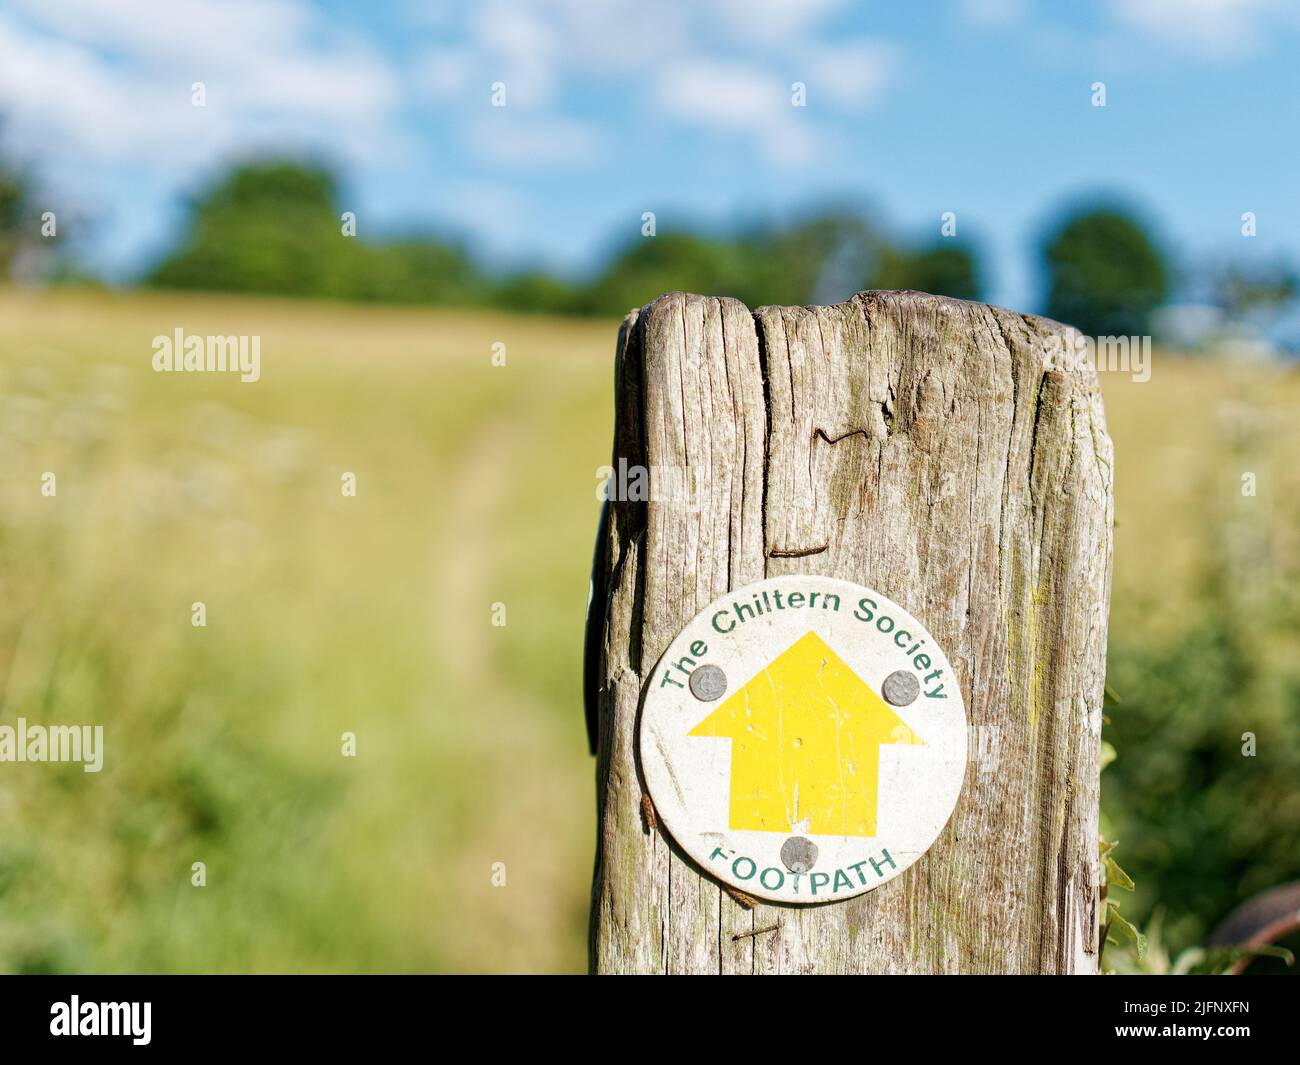 The Chiltern Society Footpath Sign, Chalk-house Green, Oxfordshire, England, UK, GB, (near reading). Stock Photo